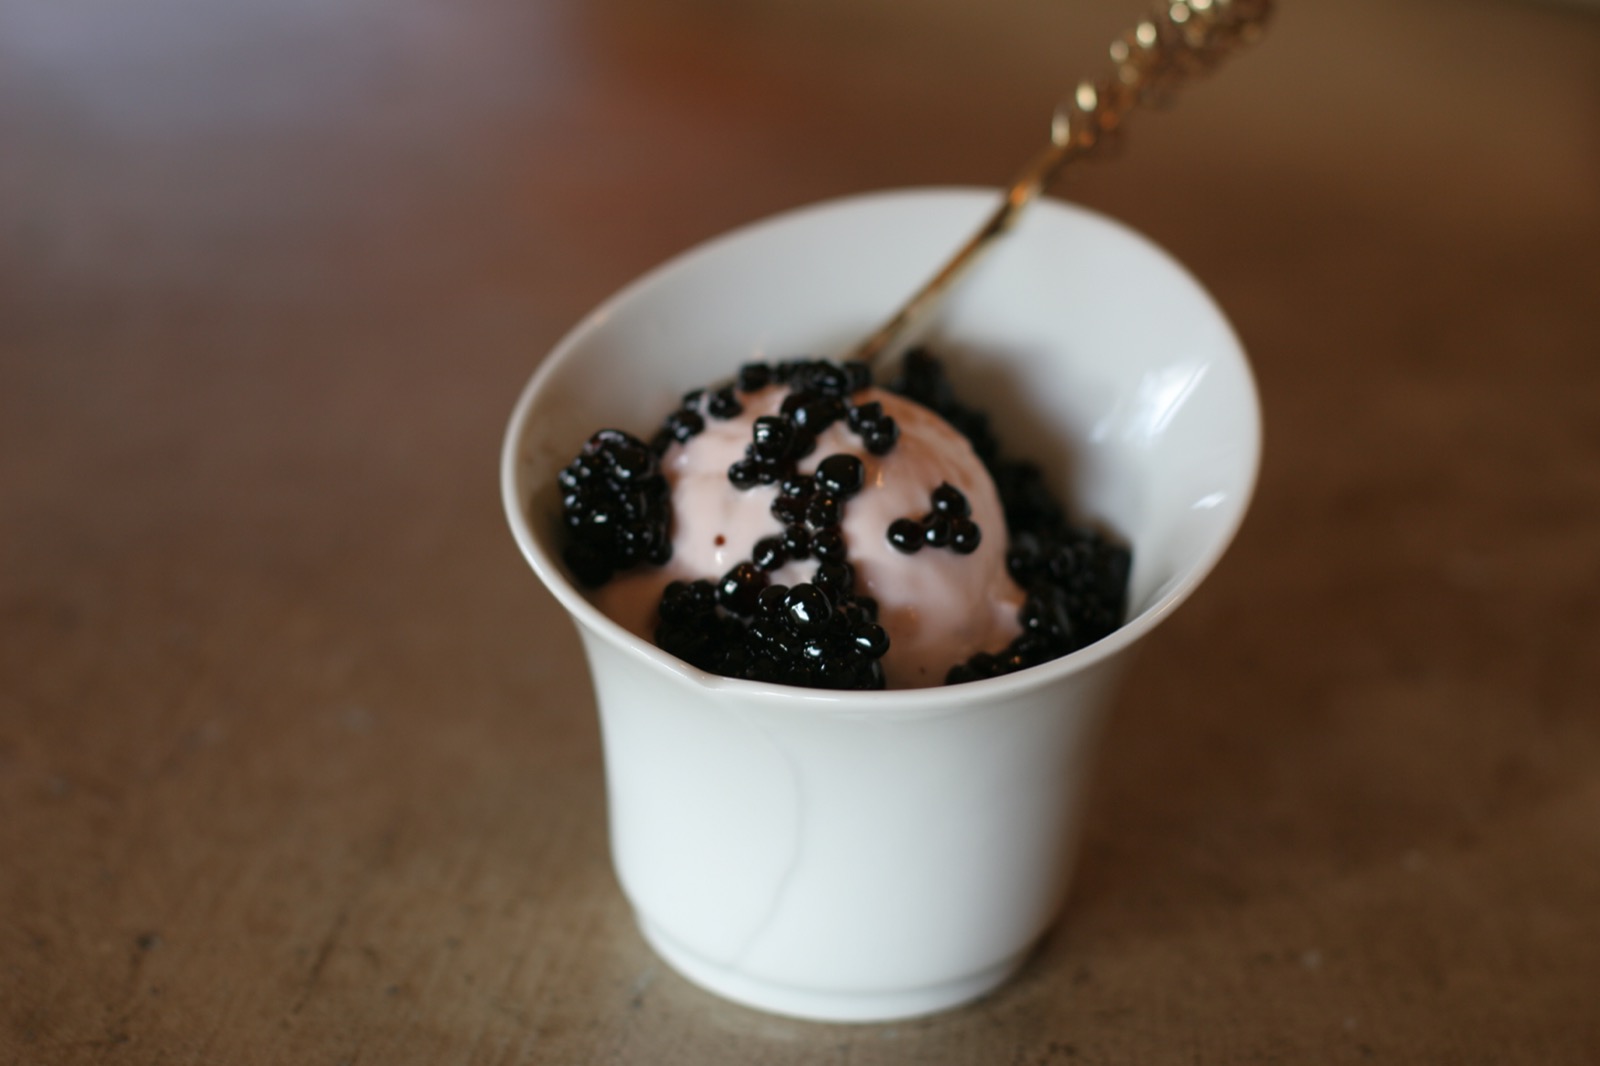 🍦 It’s Time to Vote “Yay” Or “Nay” On These Unusual Ice Cream Flavors Caviar Ice Cream